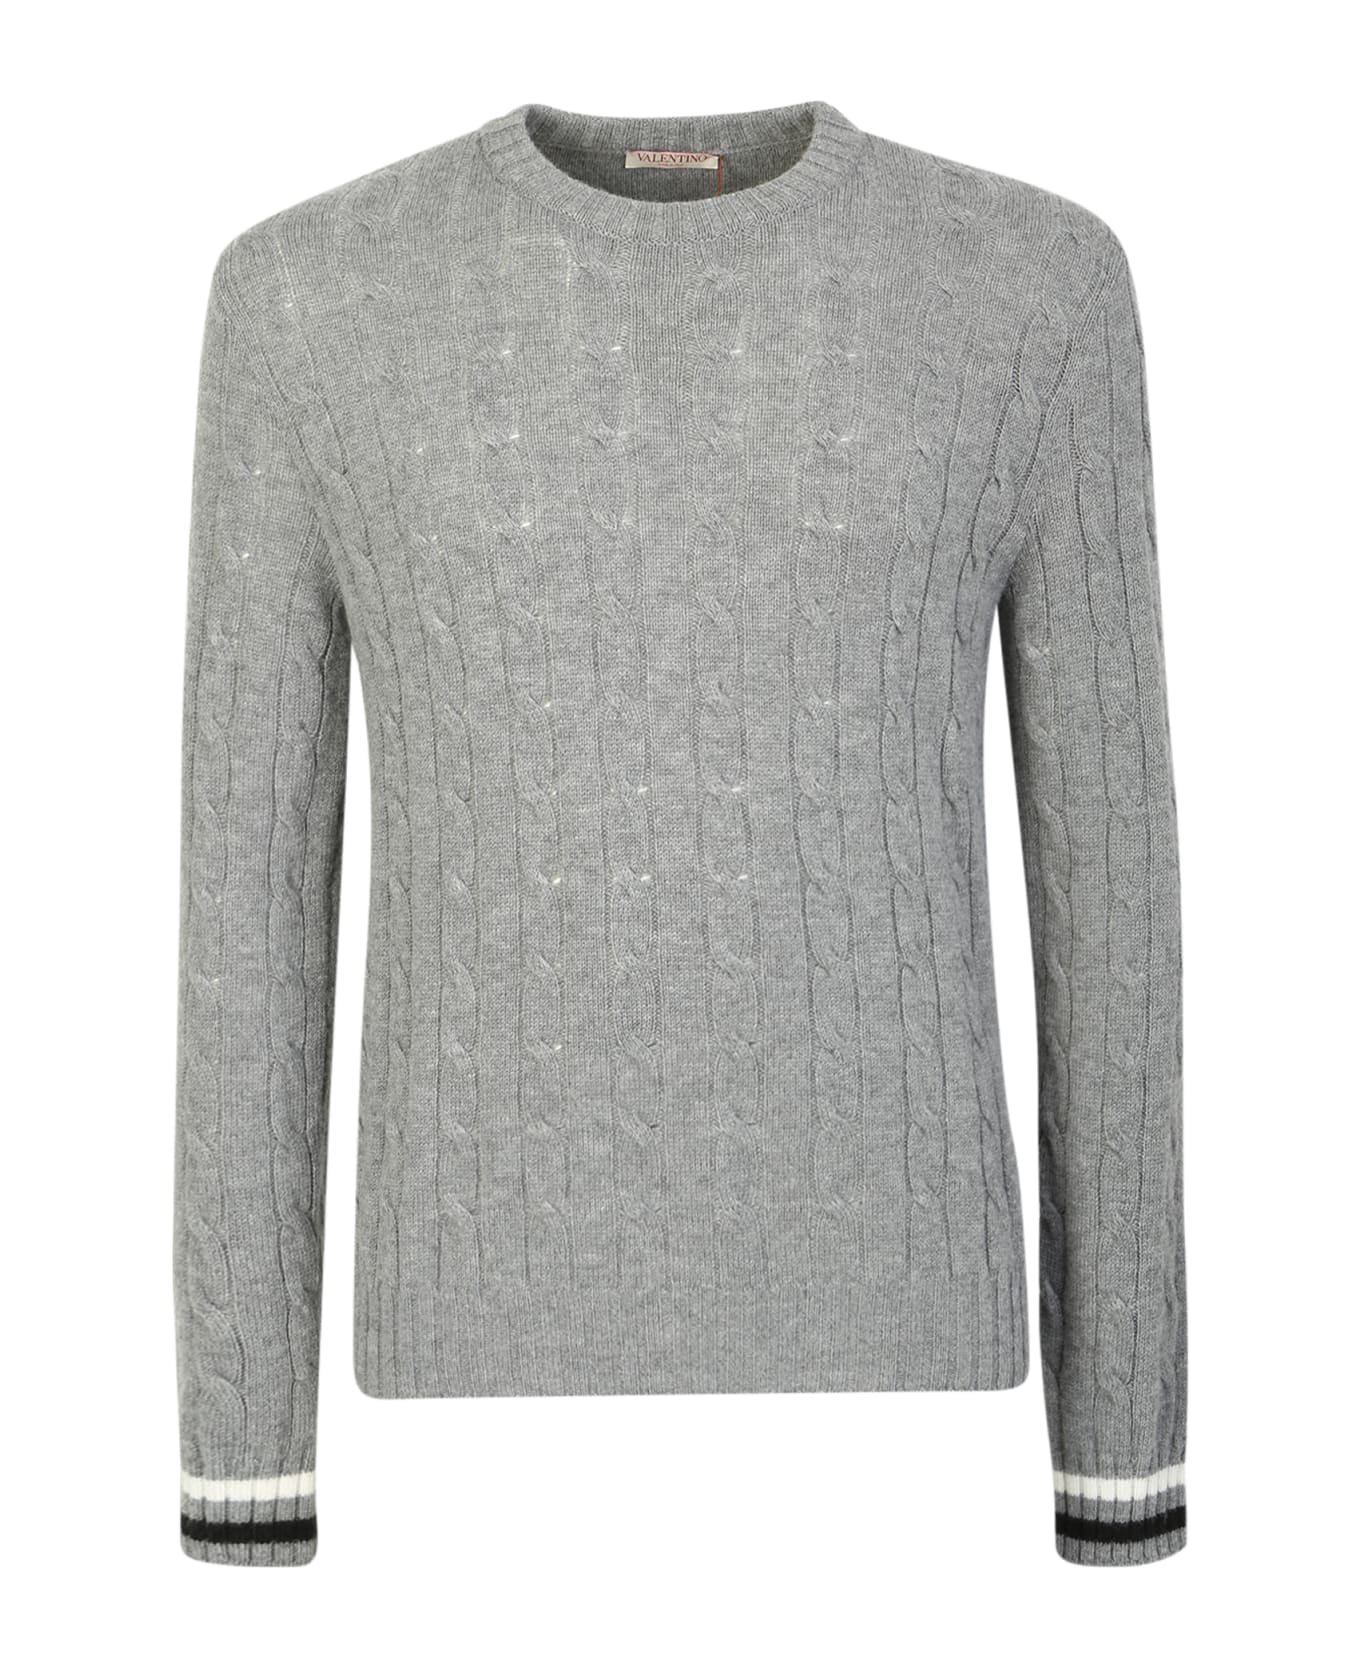 Valentino Cable Sweater Made Of Soft Virgin Wool - Grey ニットウェア